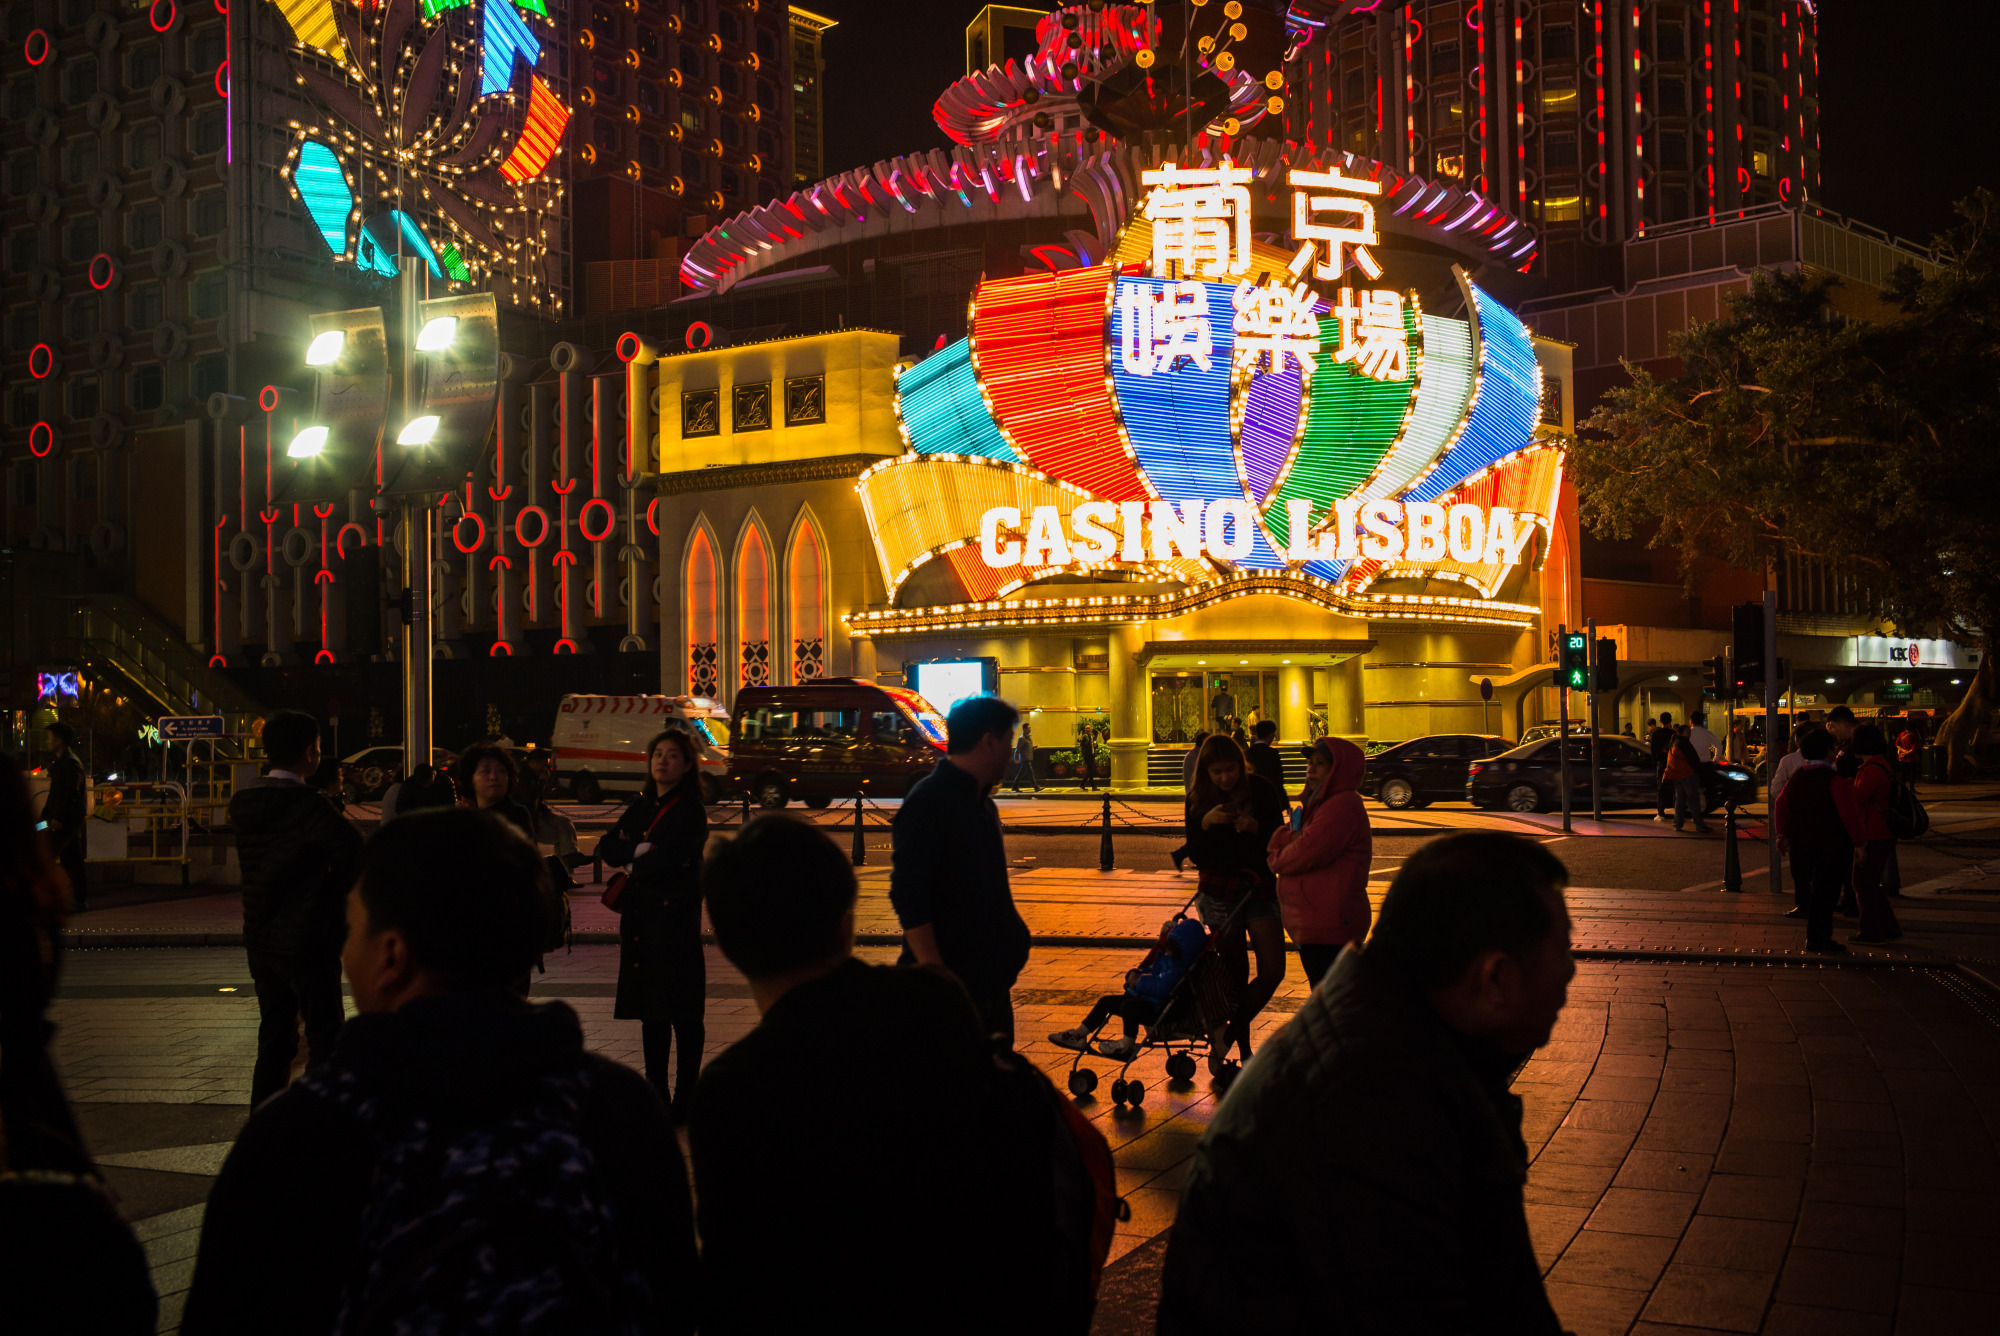 Macau, Comprehensive book on the local casino history available this month